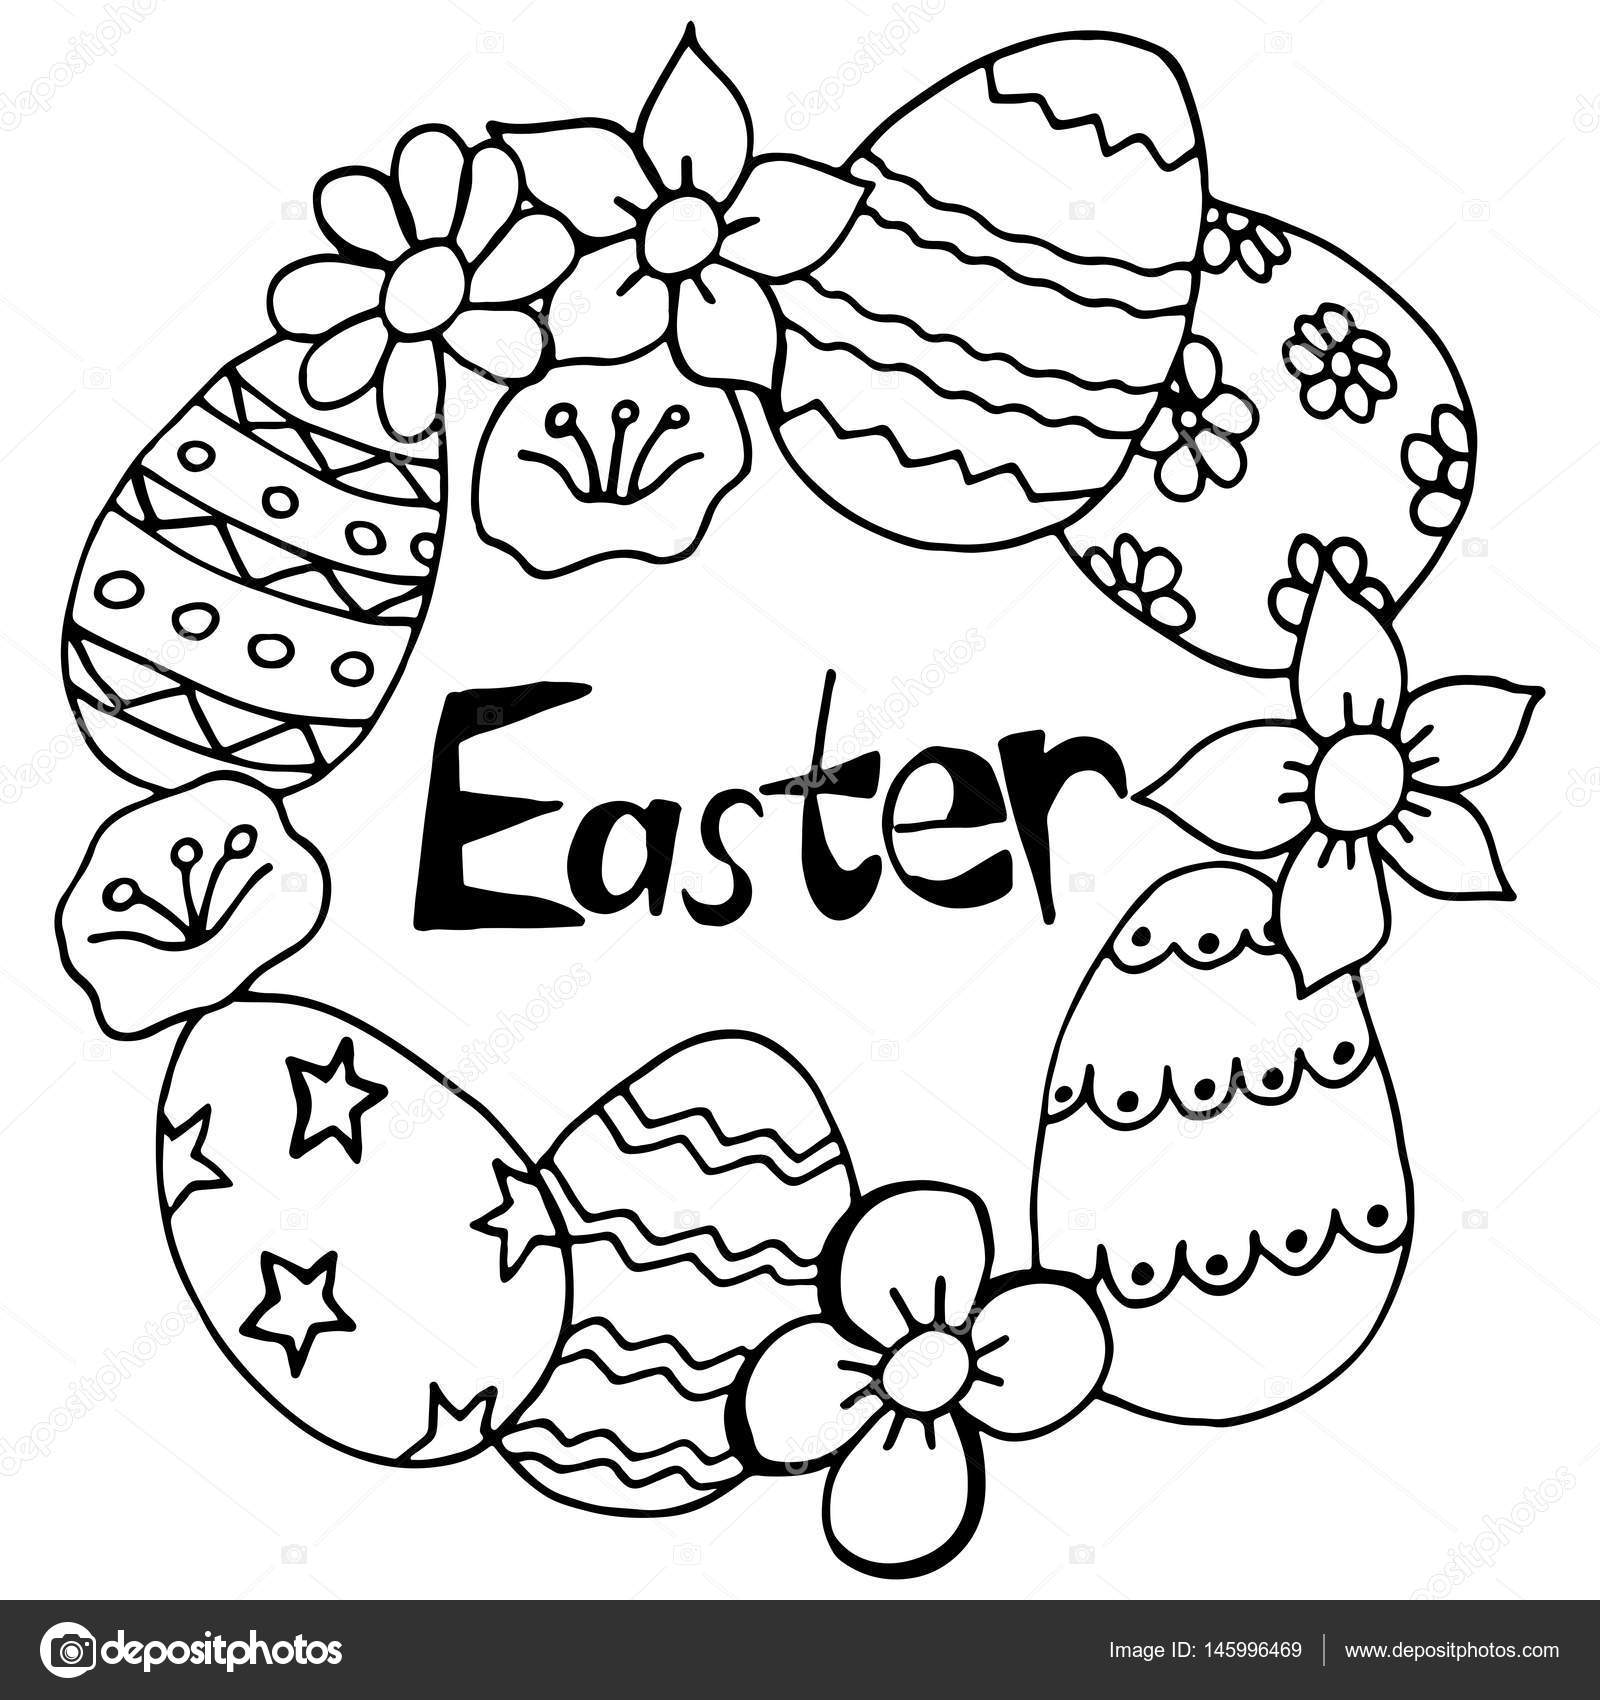 FREE Happy Easter Bunny Coloring Page and Card - Juju Sprinkles | Bunny  coloring pages, Easter bunny colouring, Easter coloring pages